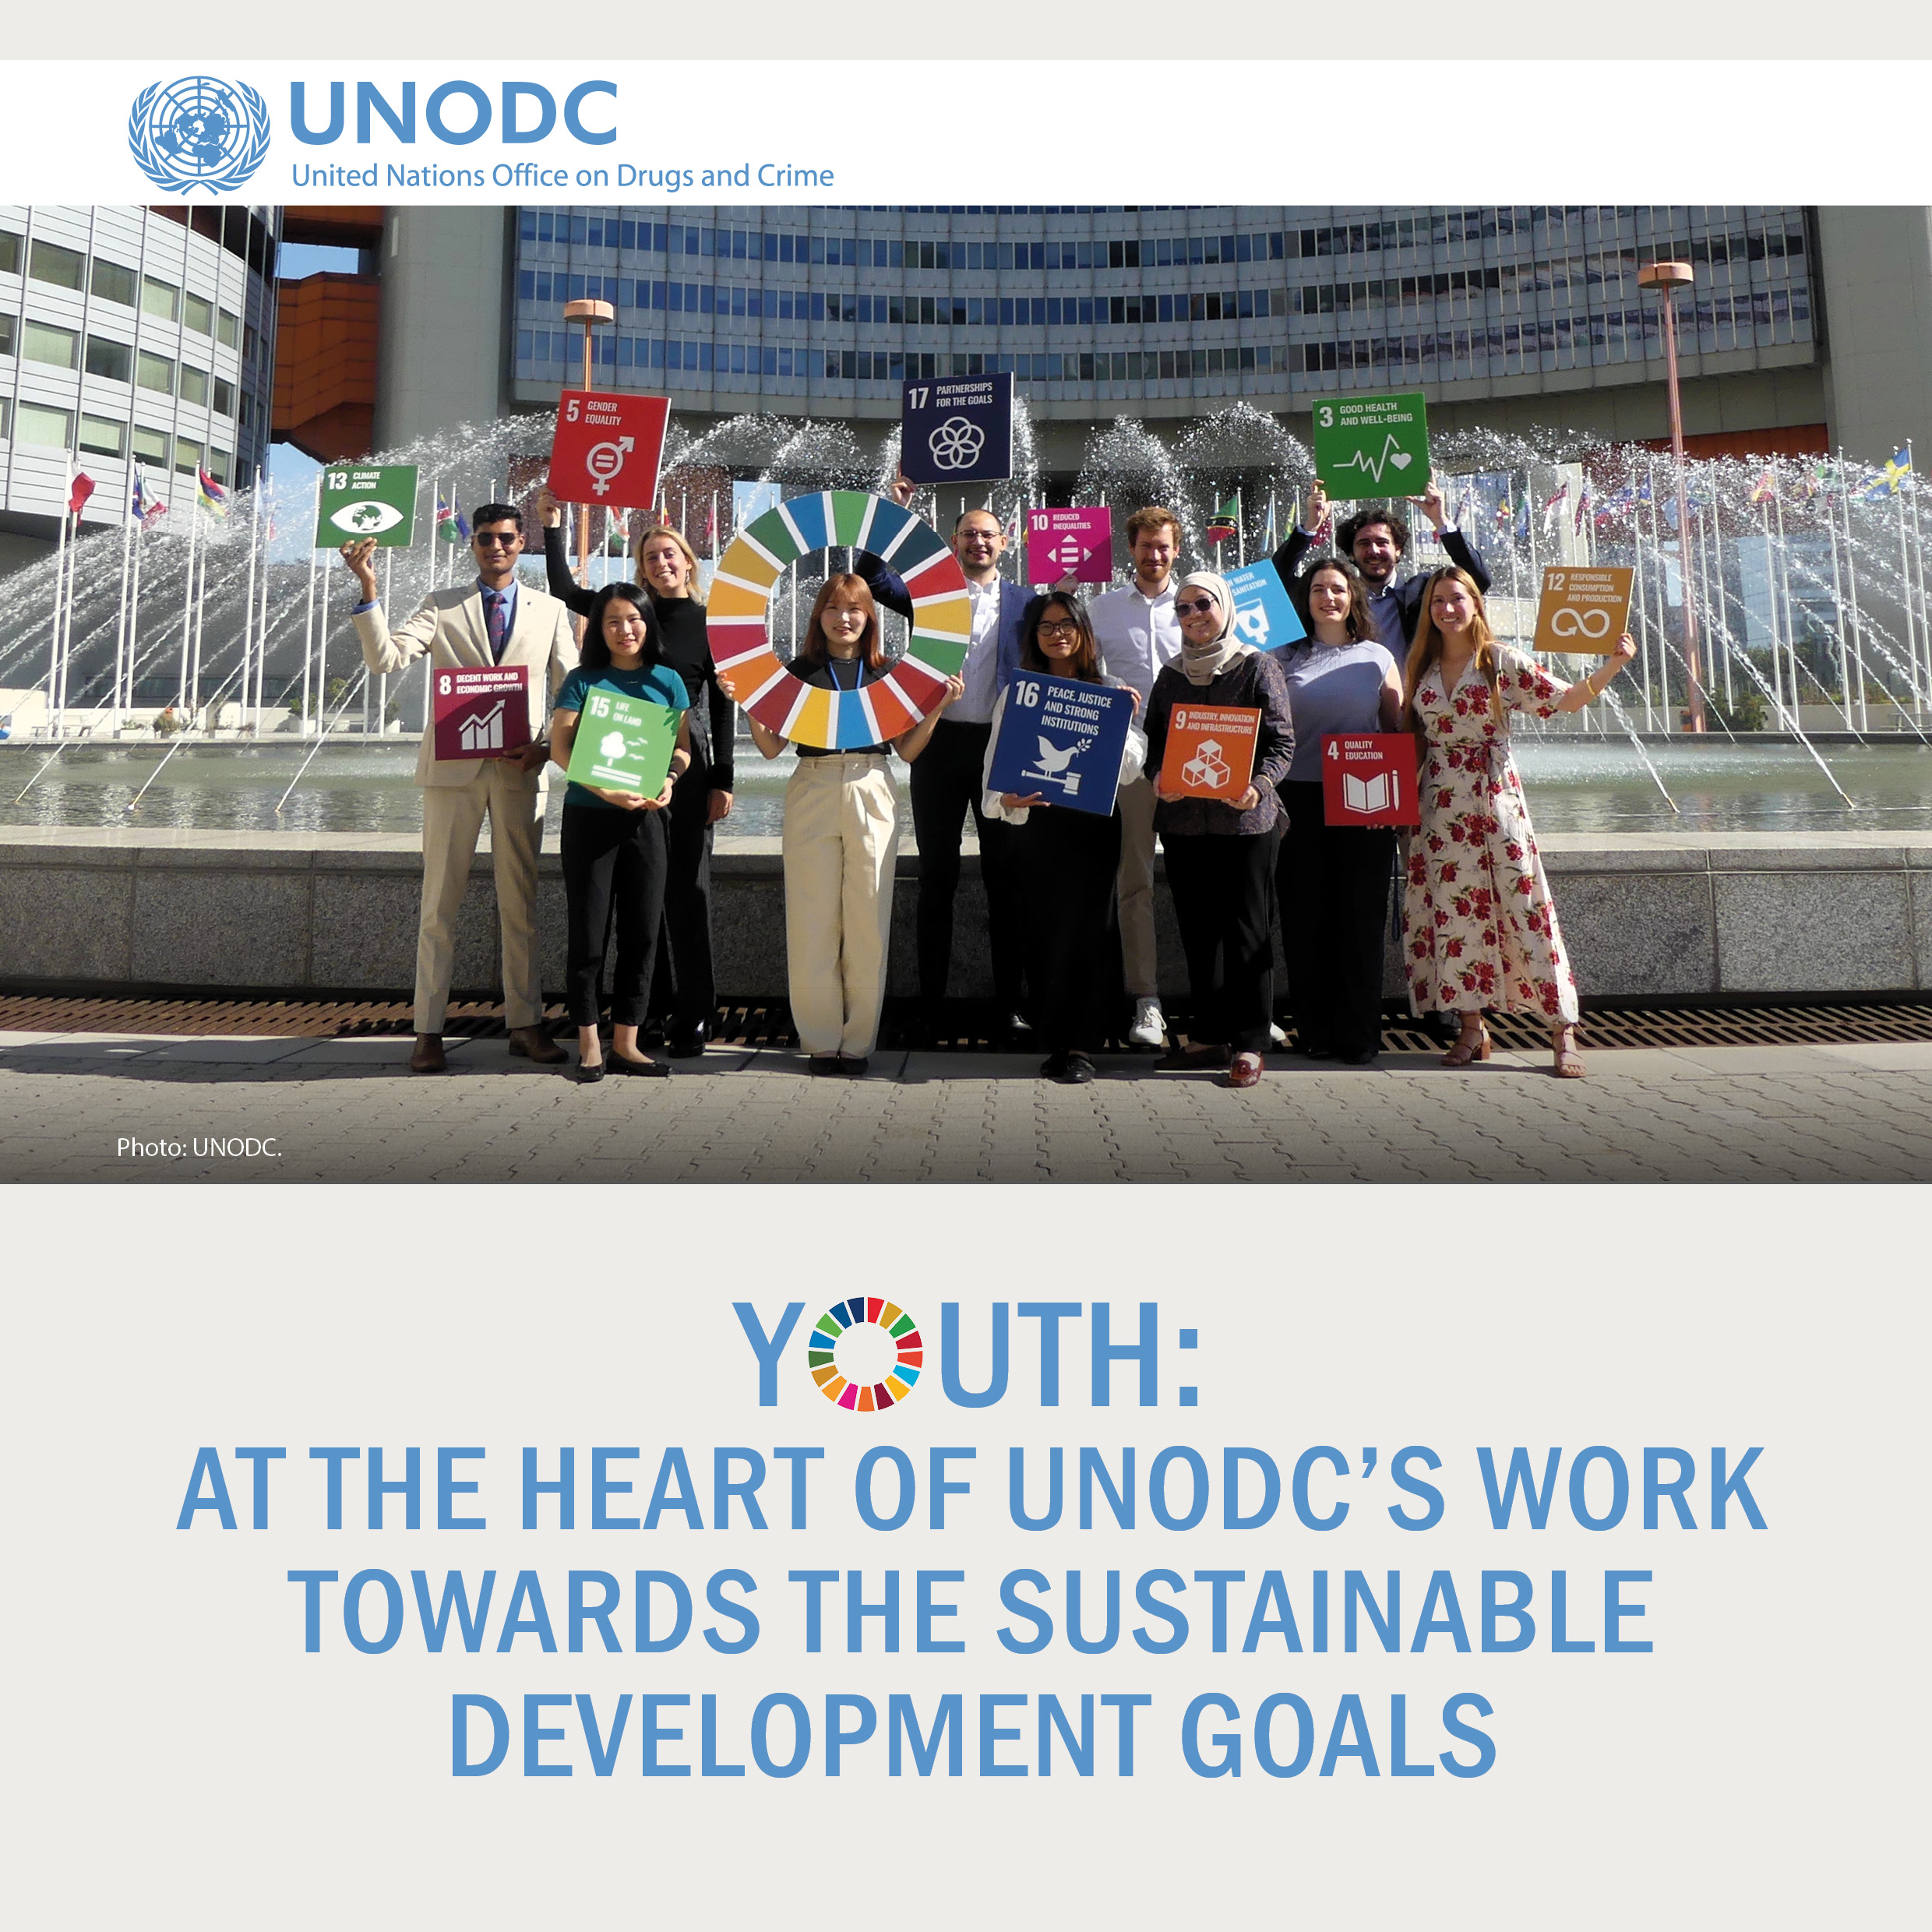 Cover page of the brochure YOUTH: At the heart of UNODC's work towards the Sustainable Development Goals. There is a photo featuring a group of young people holding SDG signs in front of a fountain at UNODC's headquarters in Vienna, Austria. 